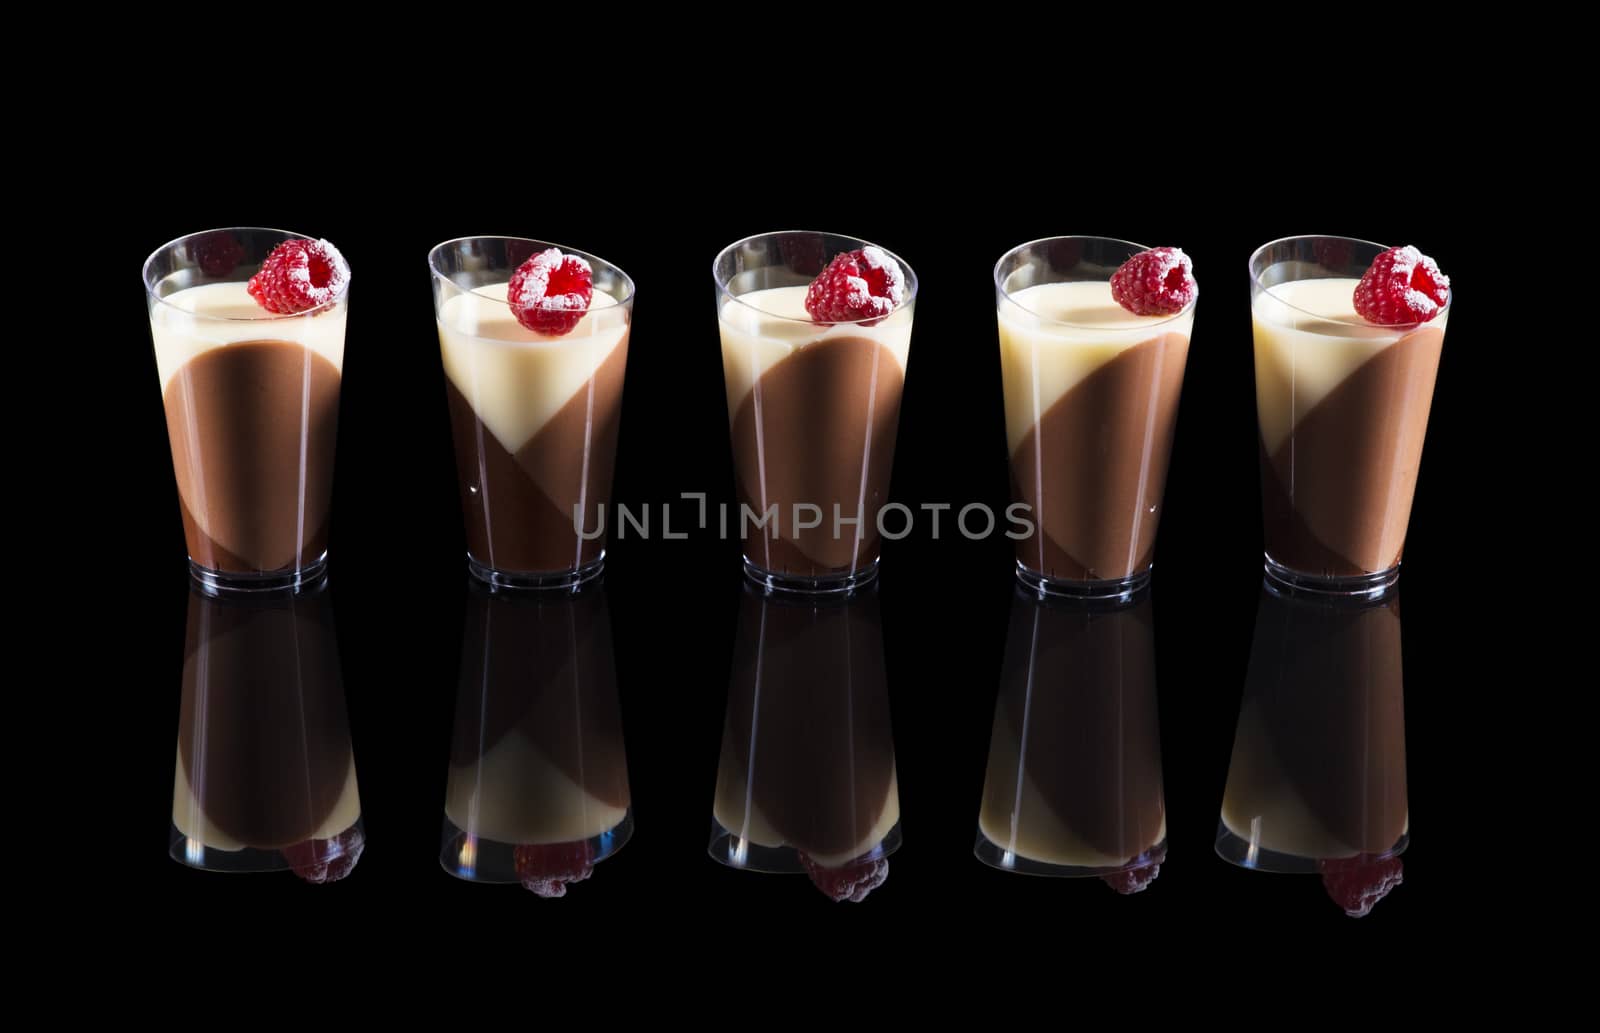 Tricolor pana cotta in the cup on black background